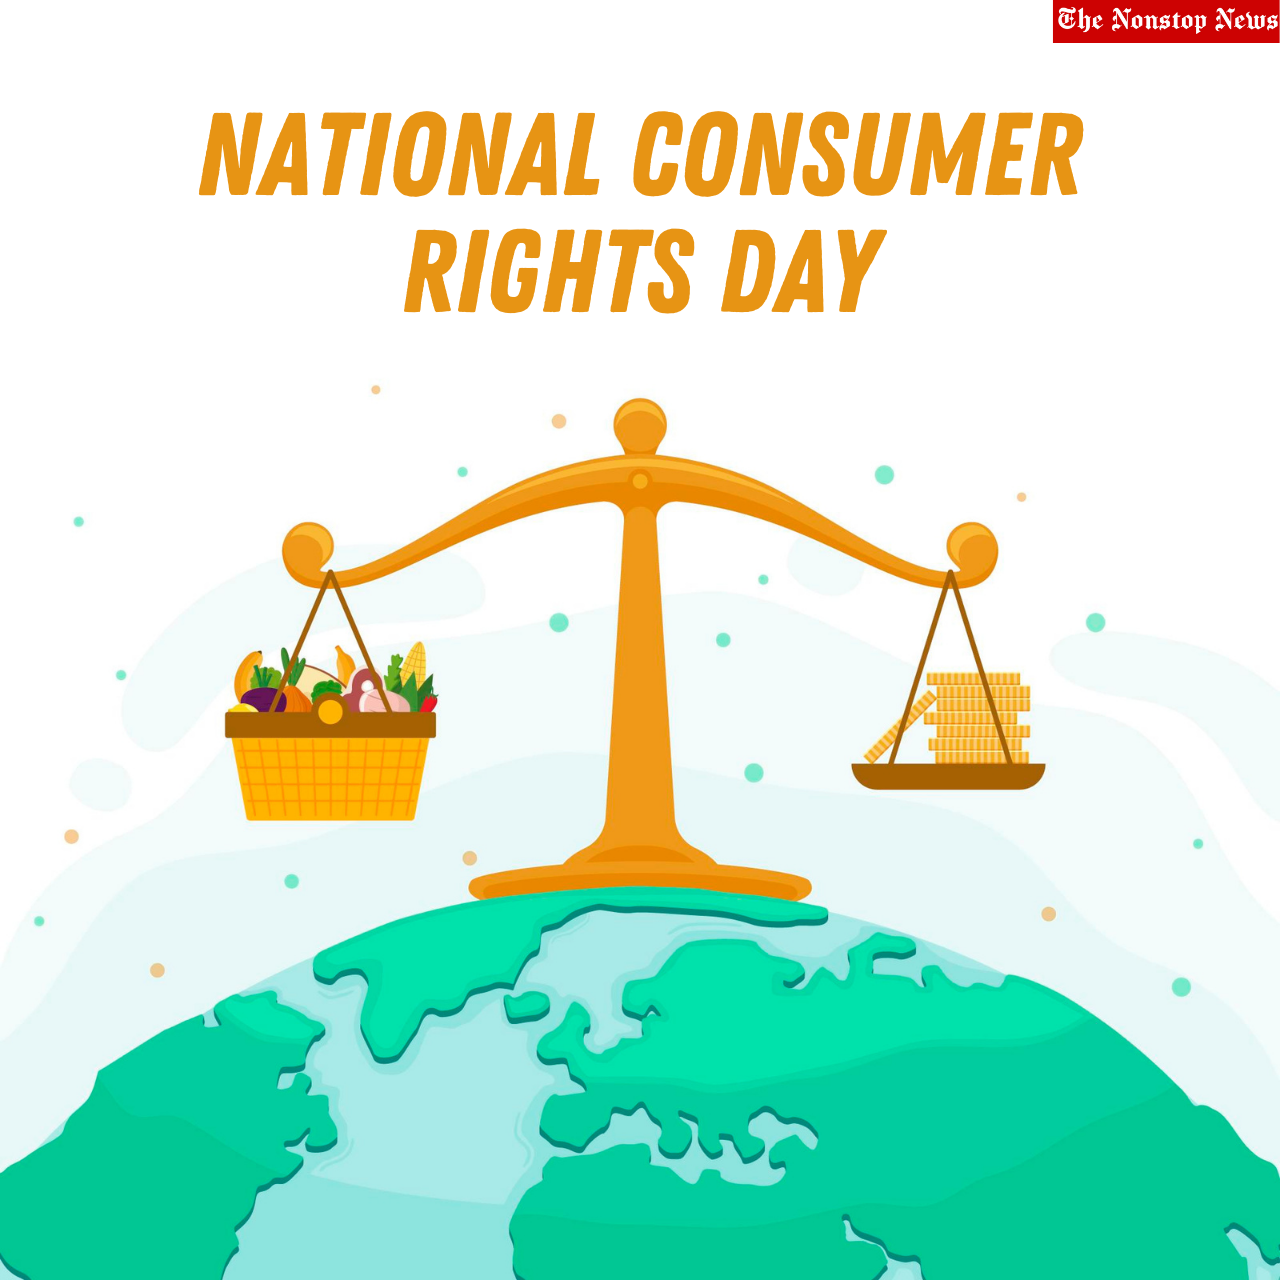 National Consumer Rights Day 2021 Quotes, HD Images, Messages, Slogans, Poster to create awareness